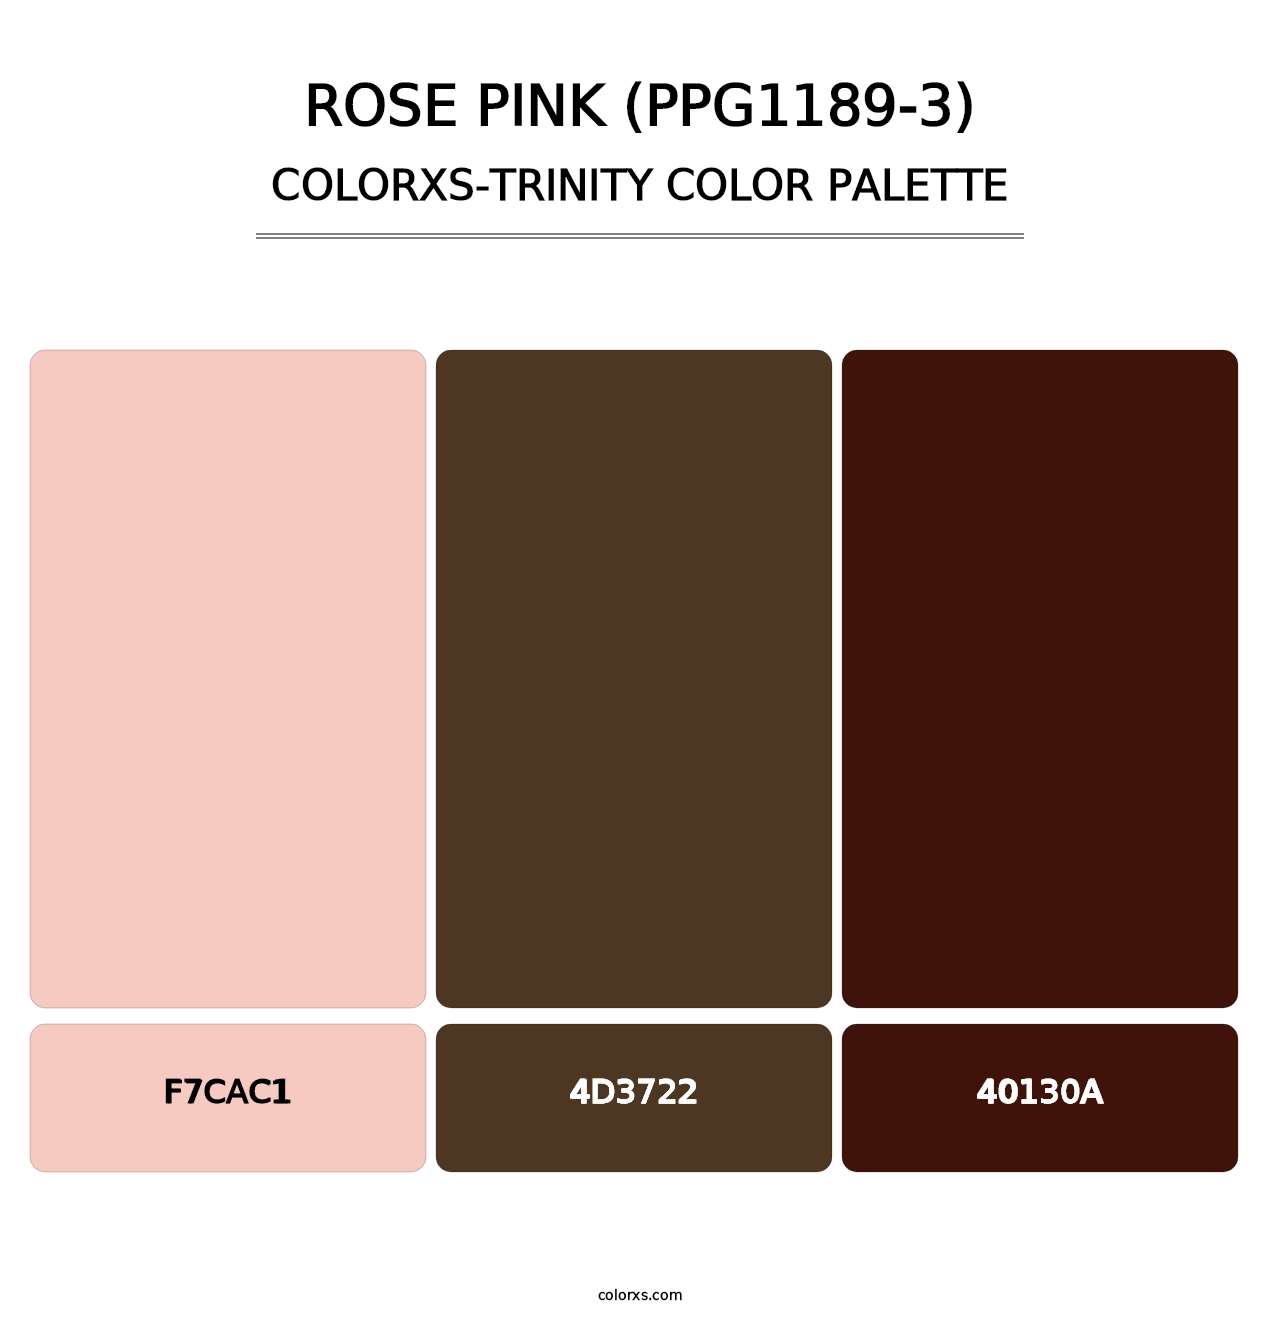 Rose Pink (PPG1189-3) - Colorxs Trinity Palette